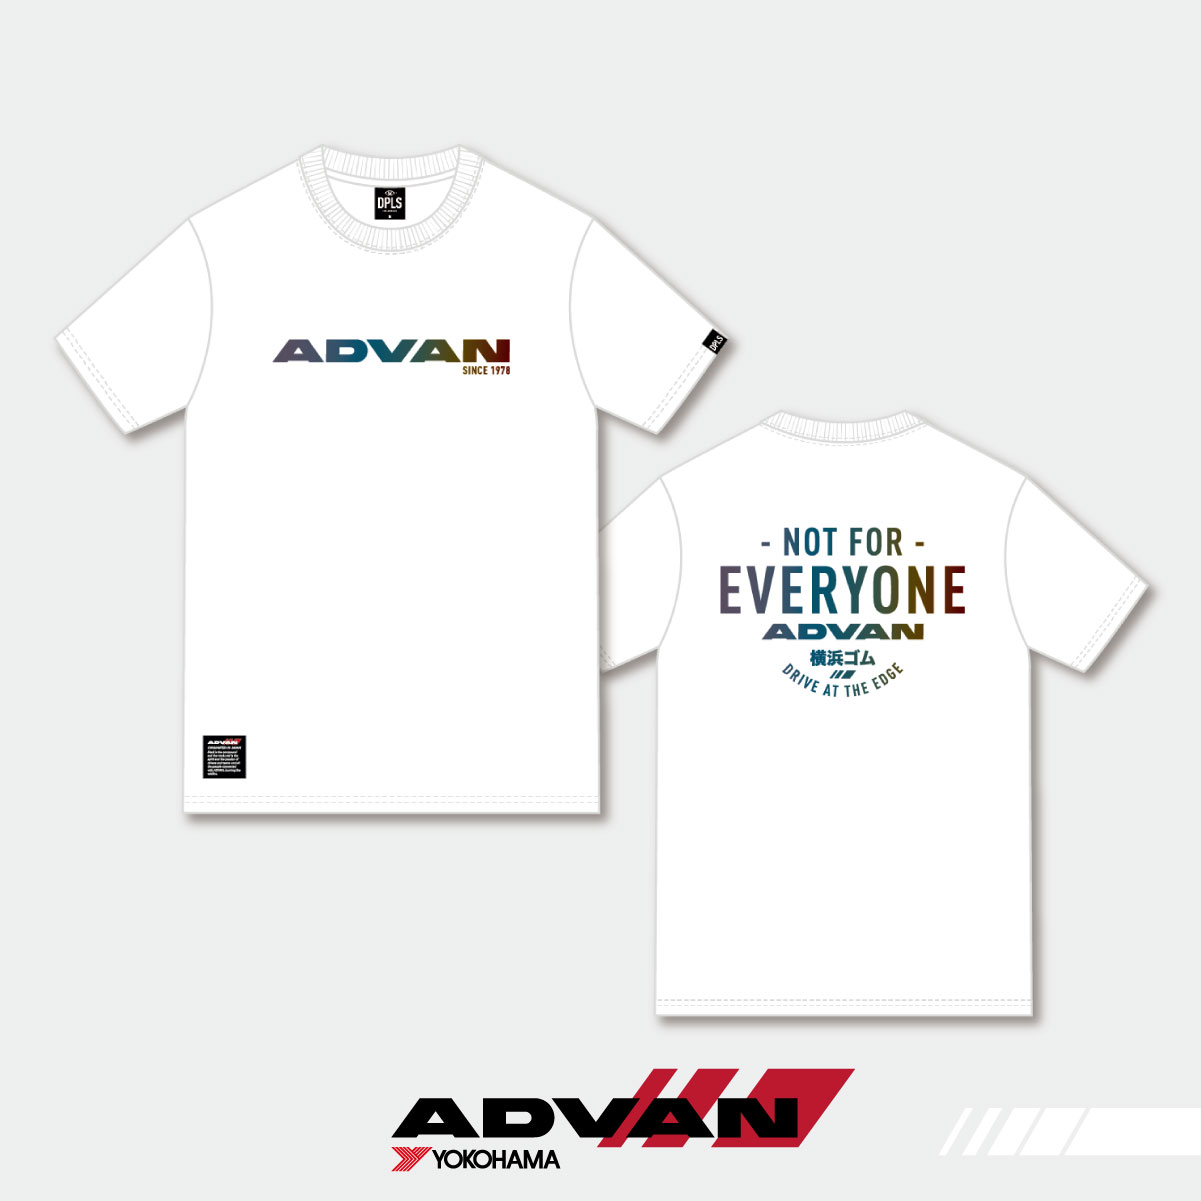 ADVAN x DPLS Gradient Effect Tee - Not for Everyone in White